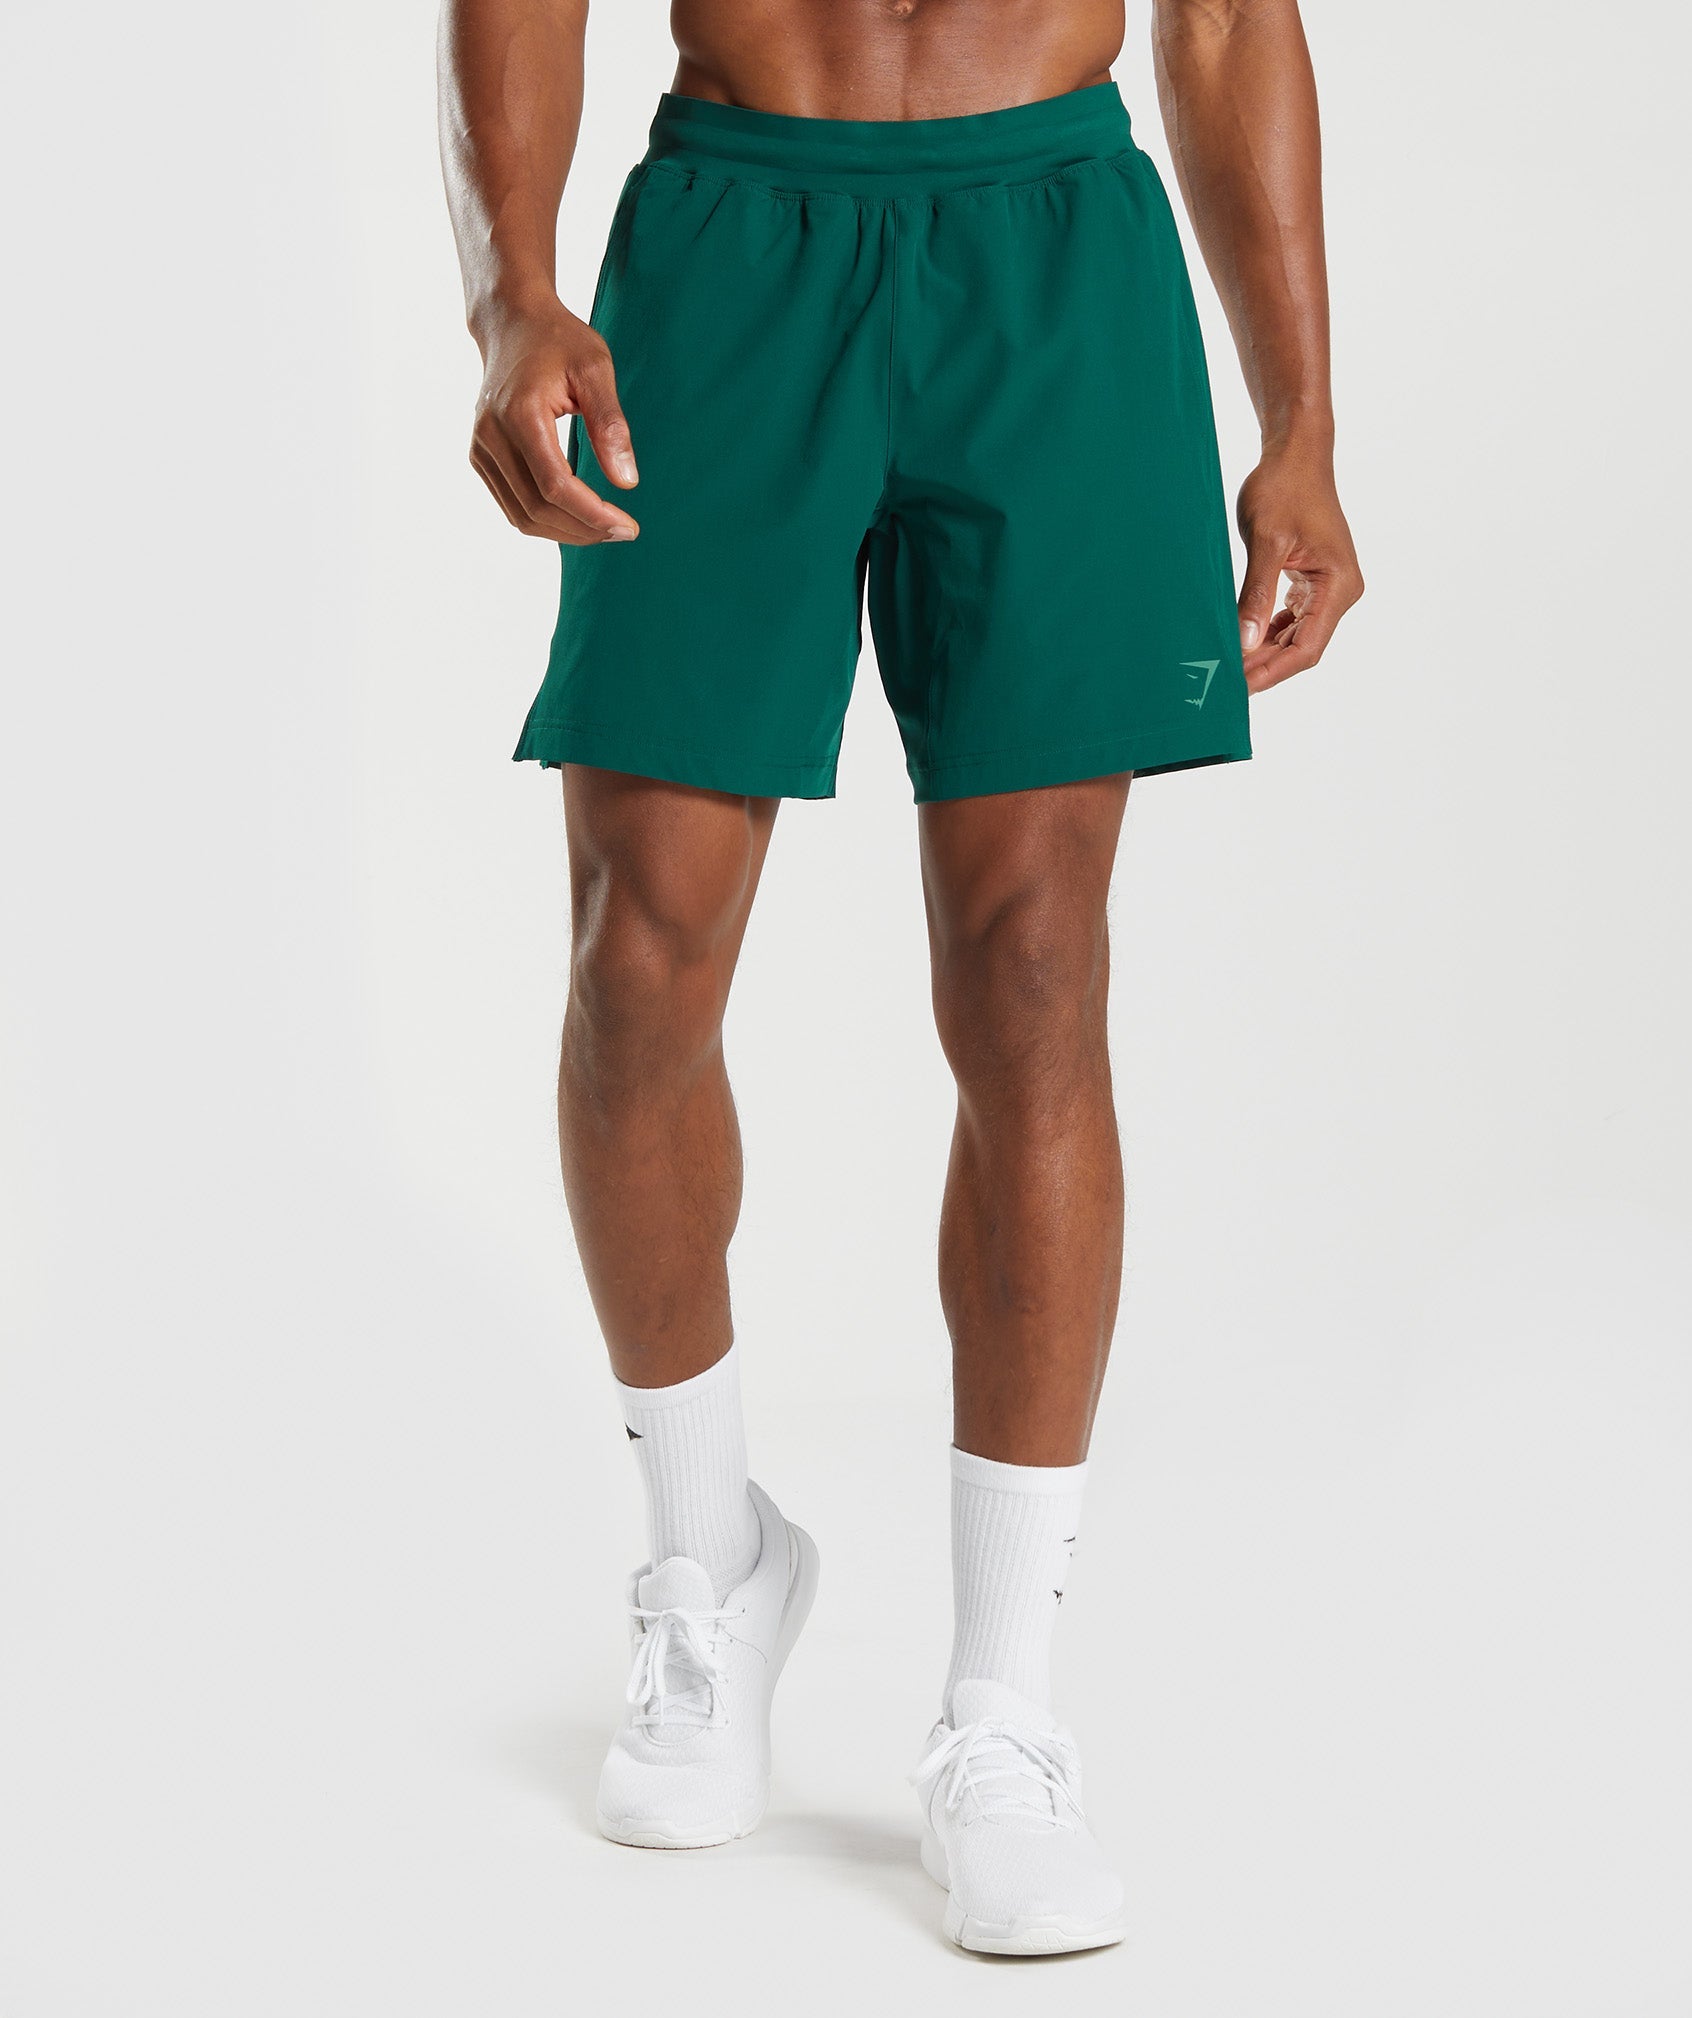 Apex 8" Function Shorts in {{variantColor} is out of stock